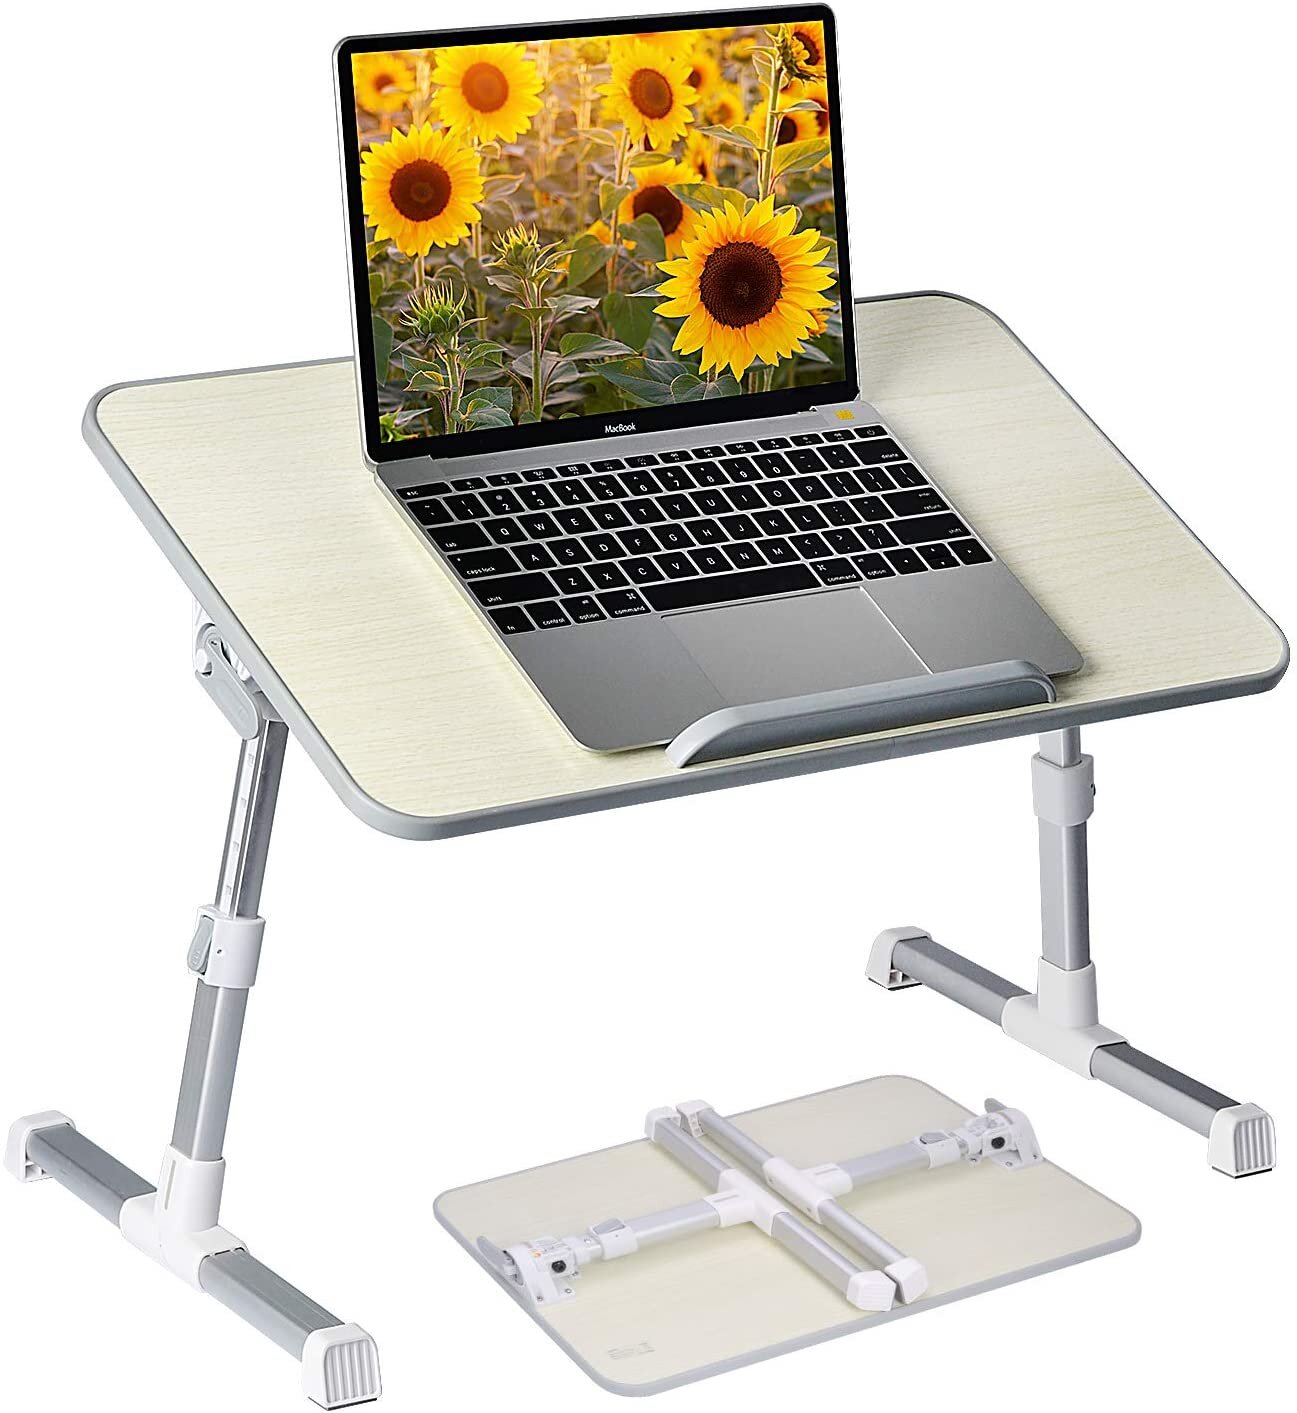 Laptop Table Desk Portable Stand Notebook Computer Foldable Bed Breakfast Tray 